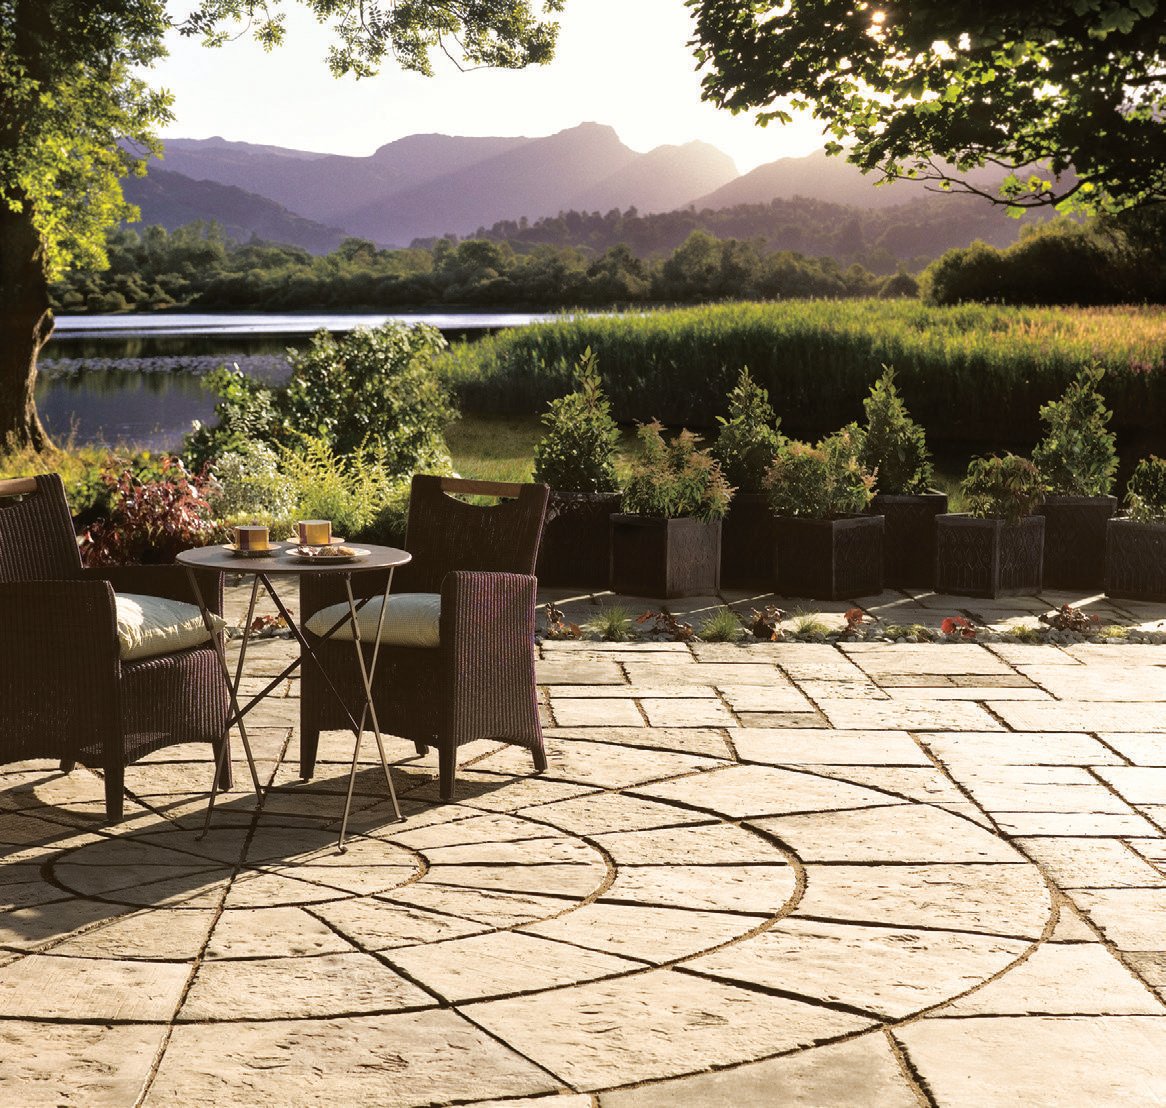 The Bradstone Old Town Paving Grey-Green circle is a perfect centre piece for an outdoor dining area. The charming traditional circle looks truly authentic with paving to match.